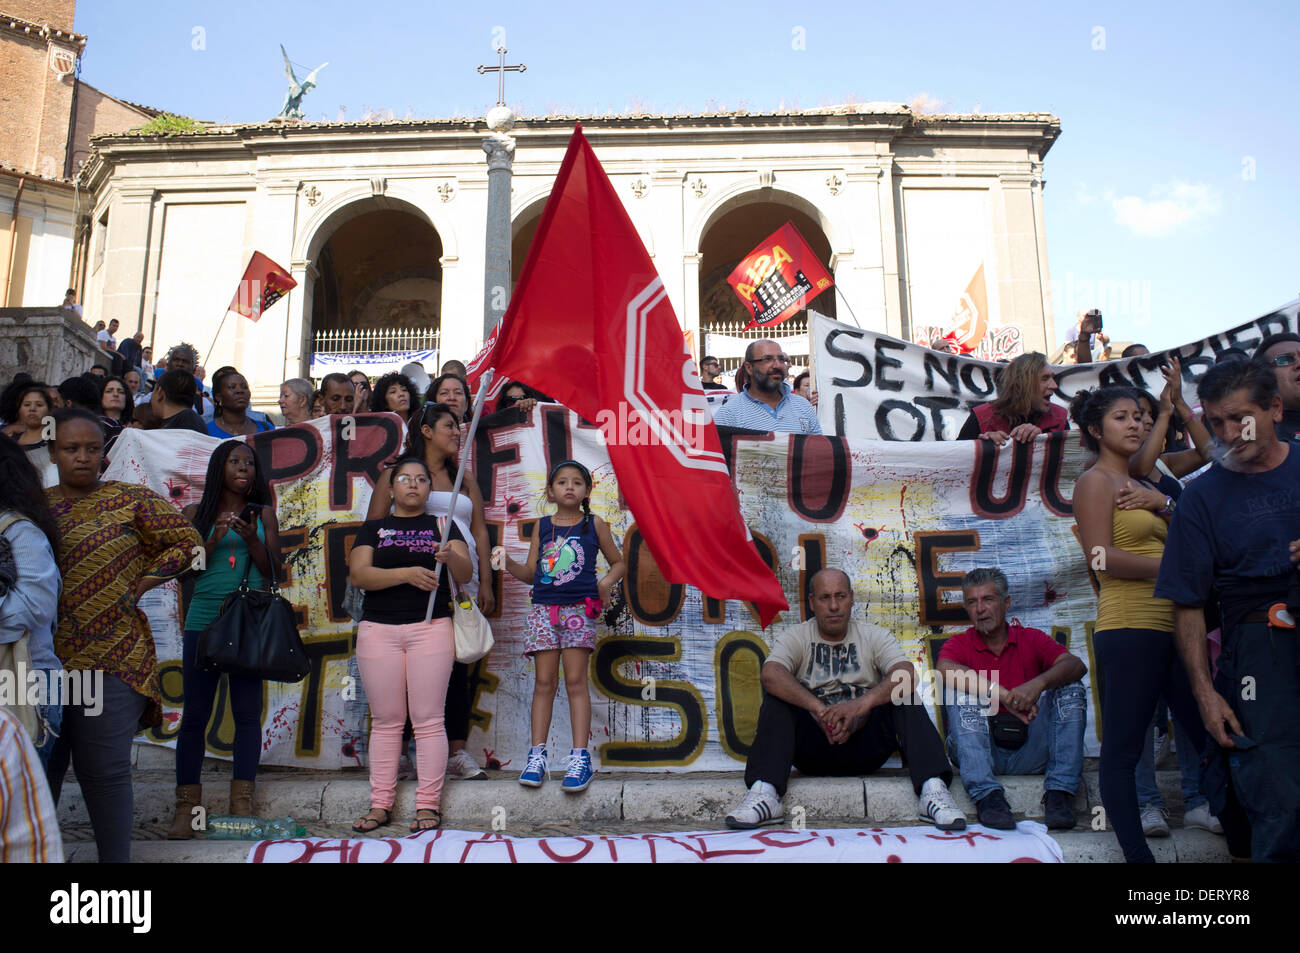 Rome Italy. 23rd Sep, 2013. Hundreds of protesters join tenant unions in central Rome for greater housing rights and stop evictions which have increased during times of economic austerity  affecting families who can ill afford to pay their rents following rent hikes Stock Photo